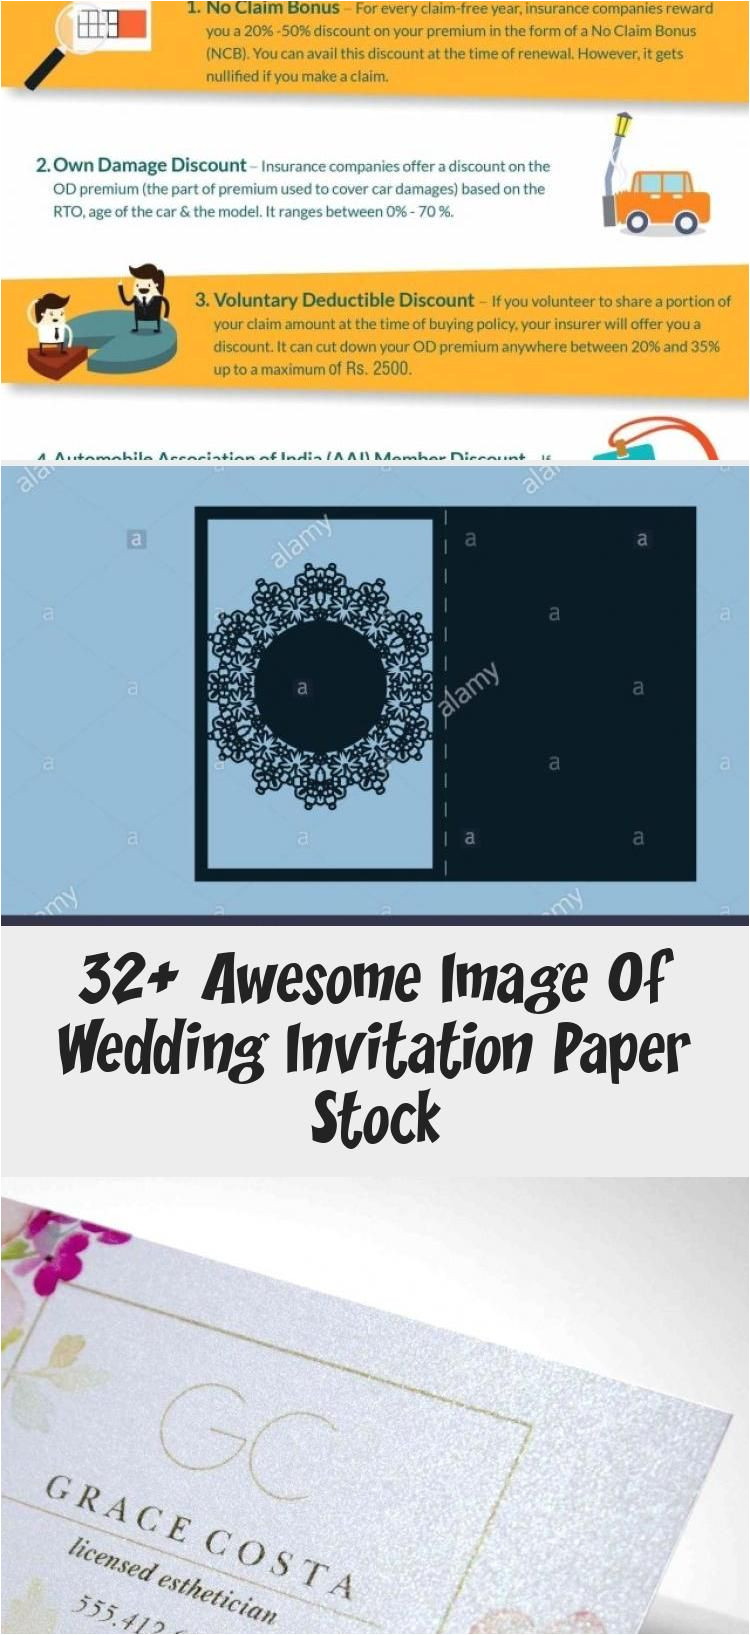 Wedding Card Under 20 Rs 32 Awesome Image Of Wedding Invitation Paper Stock